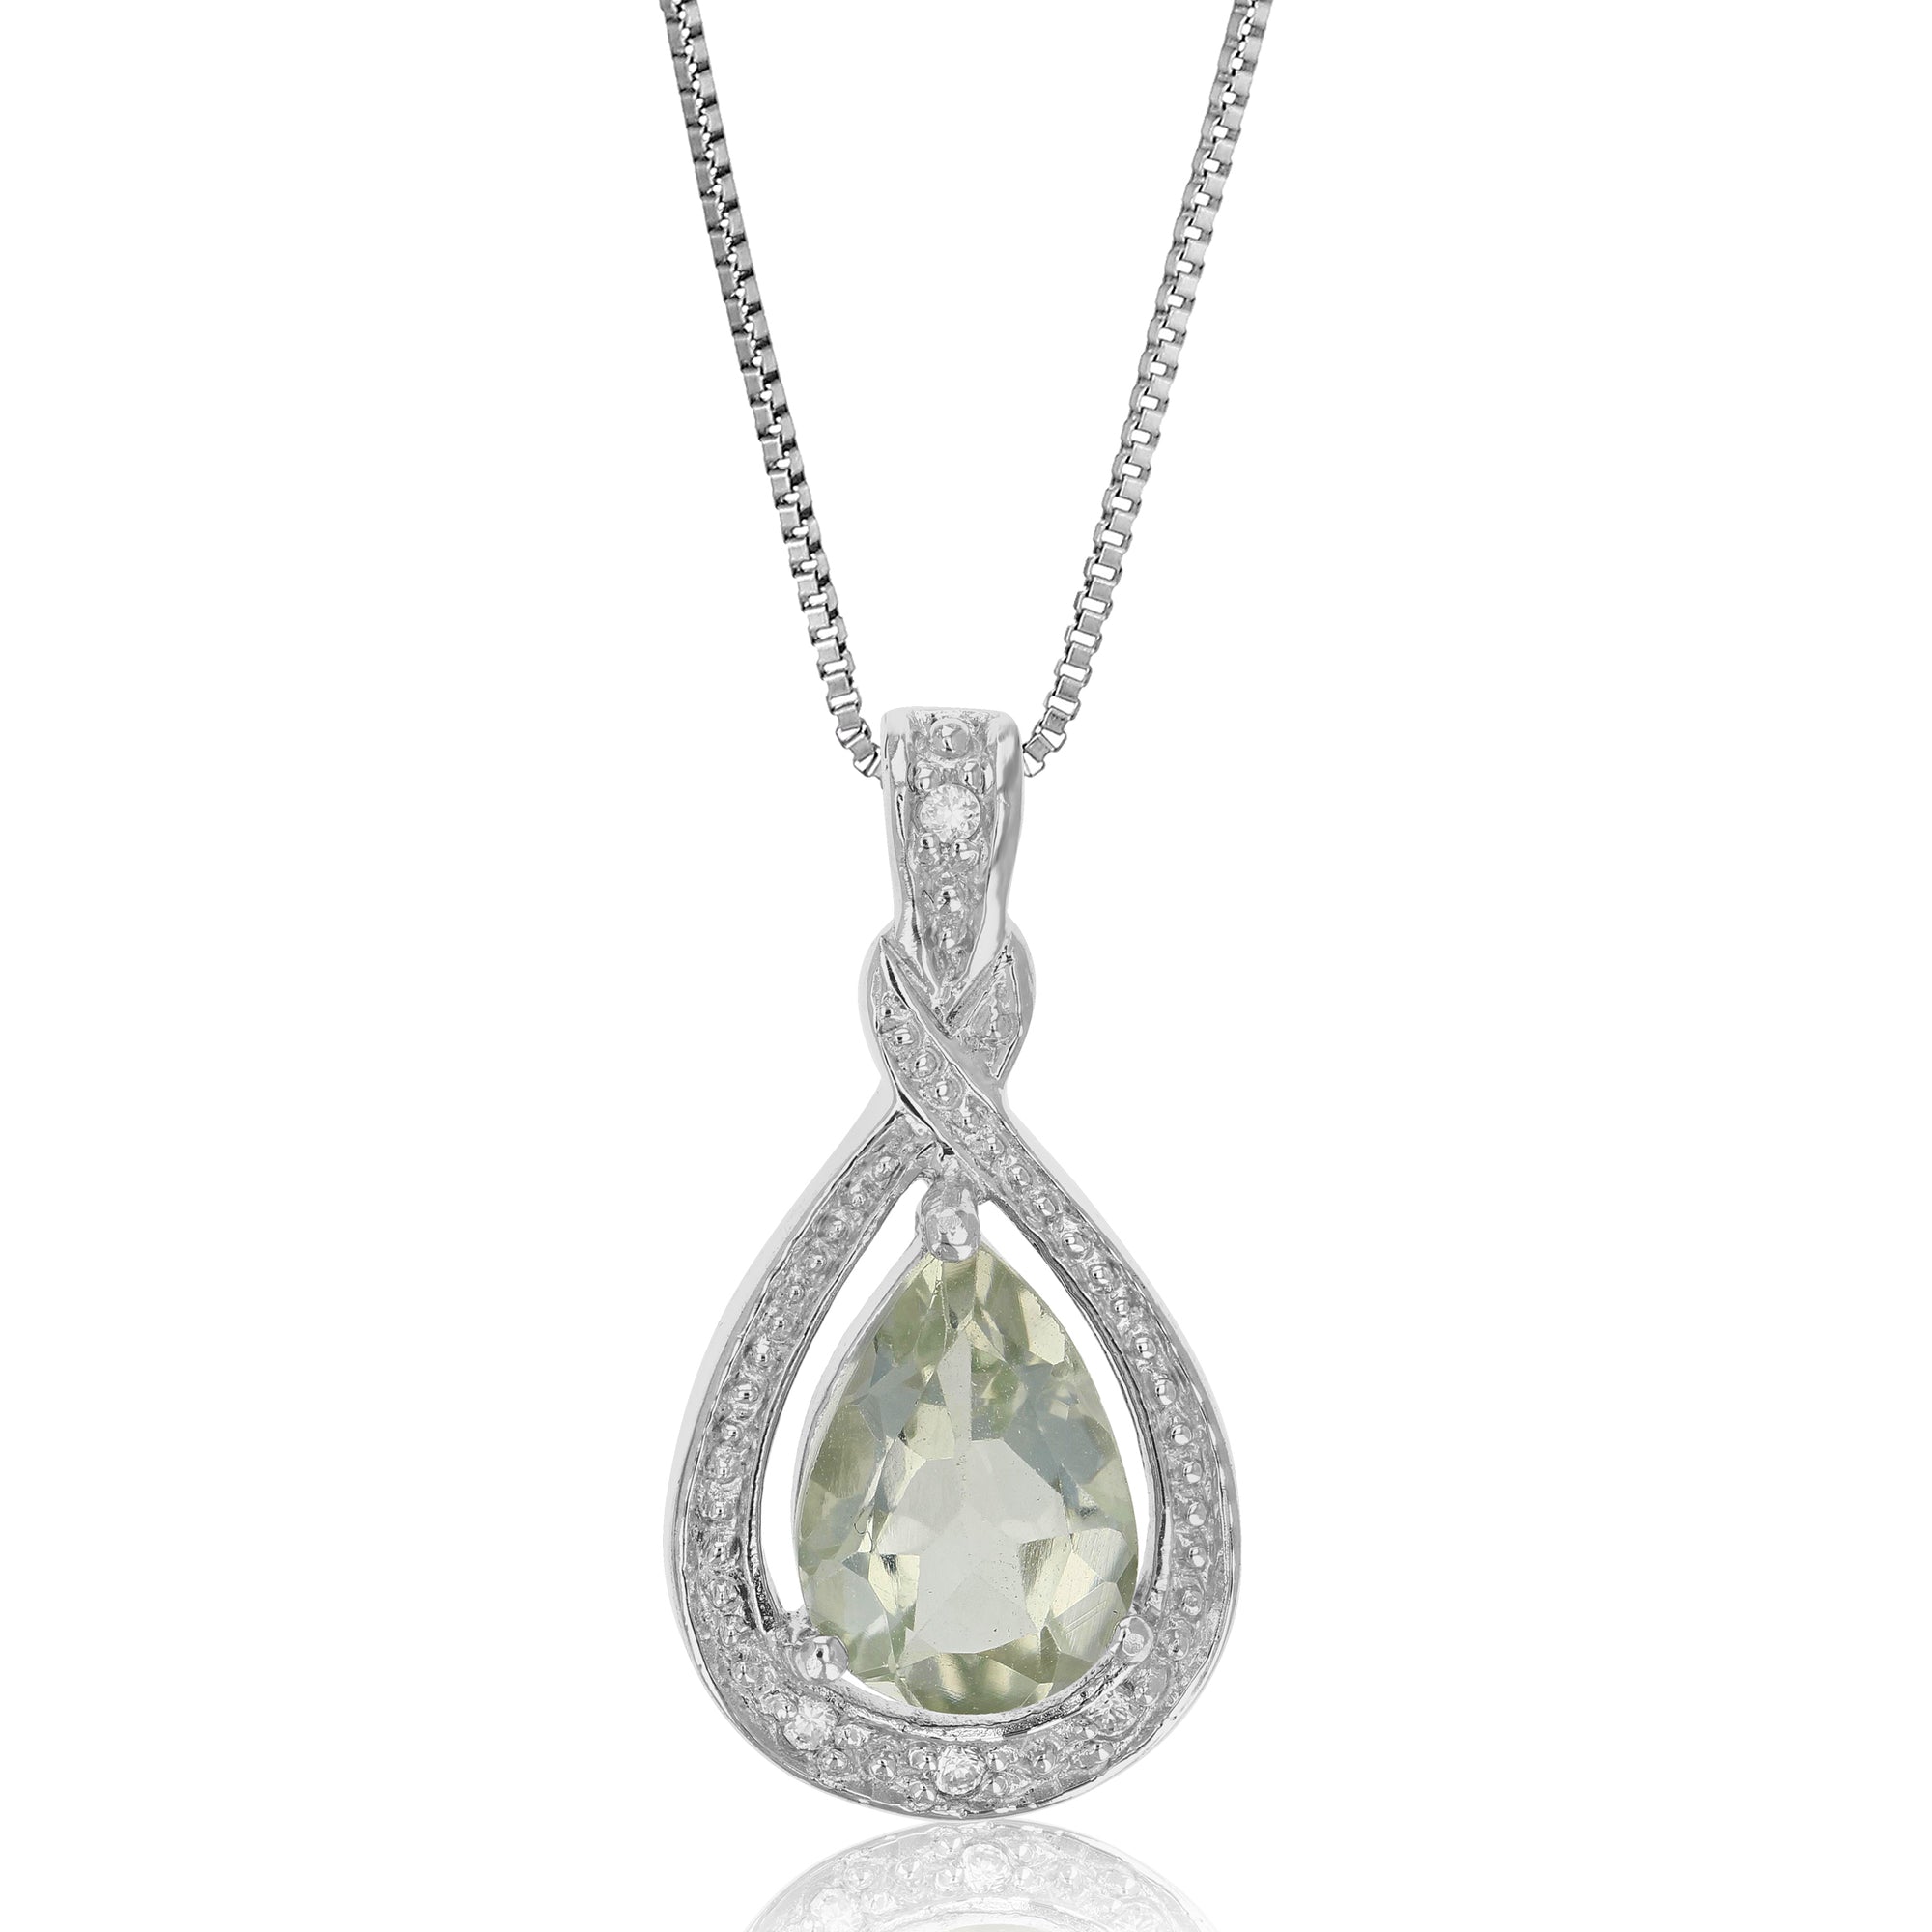 1.35 cttw Pendant Necklace, Green Amethyst Pear Shape Pendant Necklace for Women in .925 Sterling Silver with Rhodium, 18 Inch Chain, Prong Setting